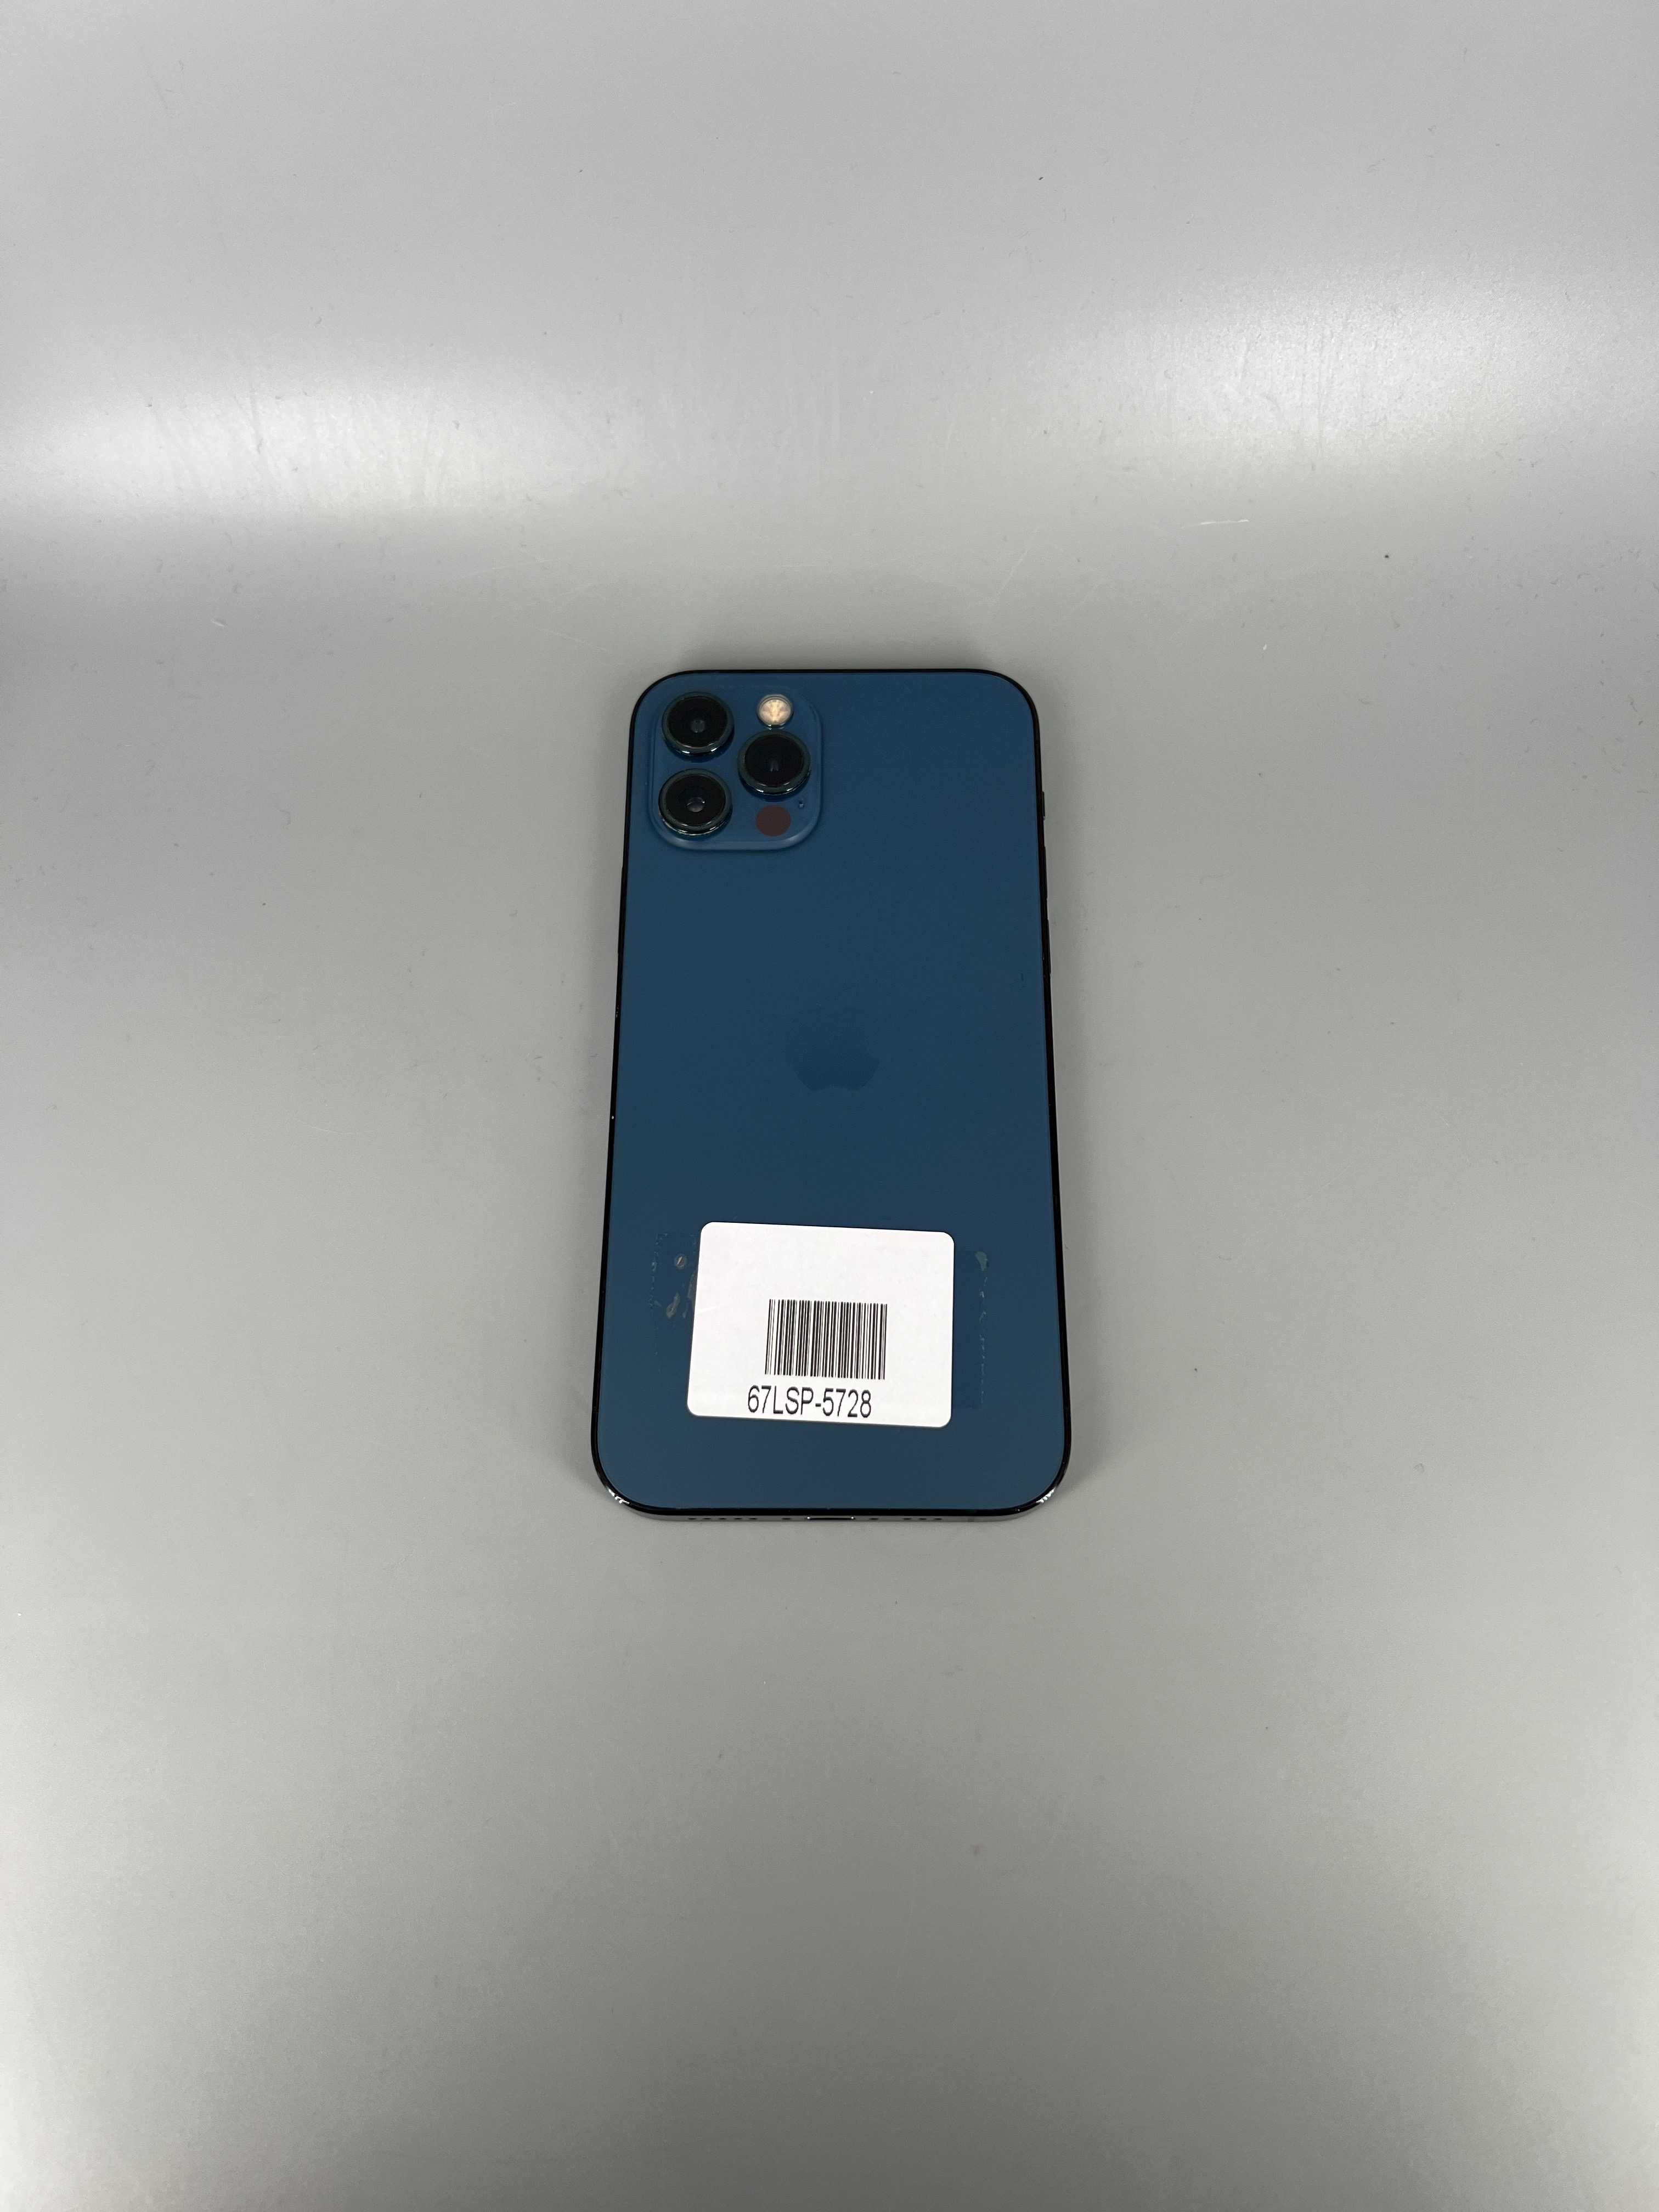 Used iPhone 12 Pro 128GB Pacific Blue 67LSP-5728